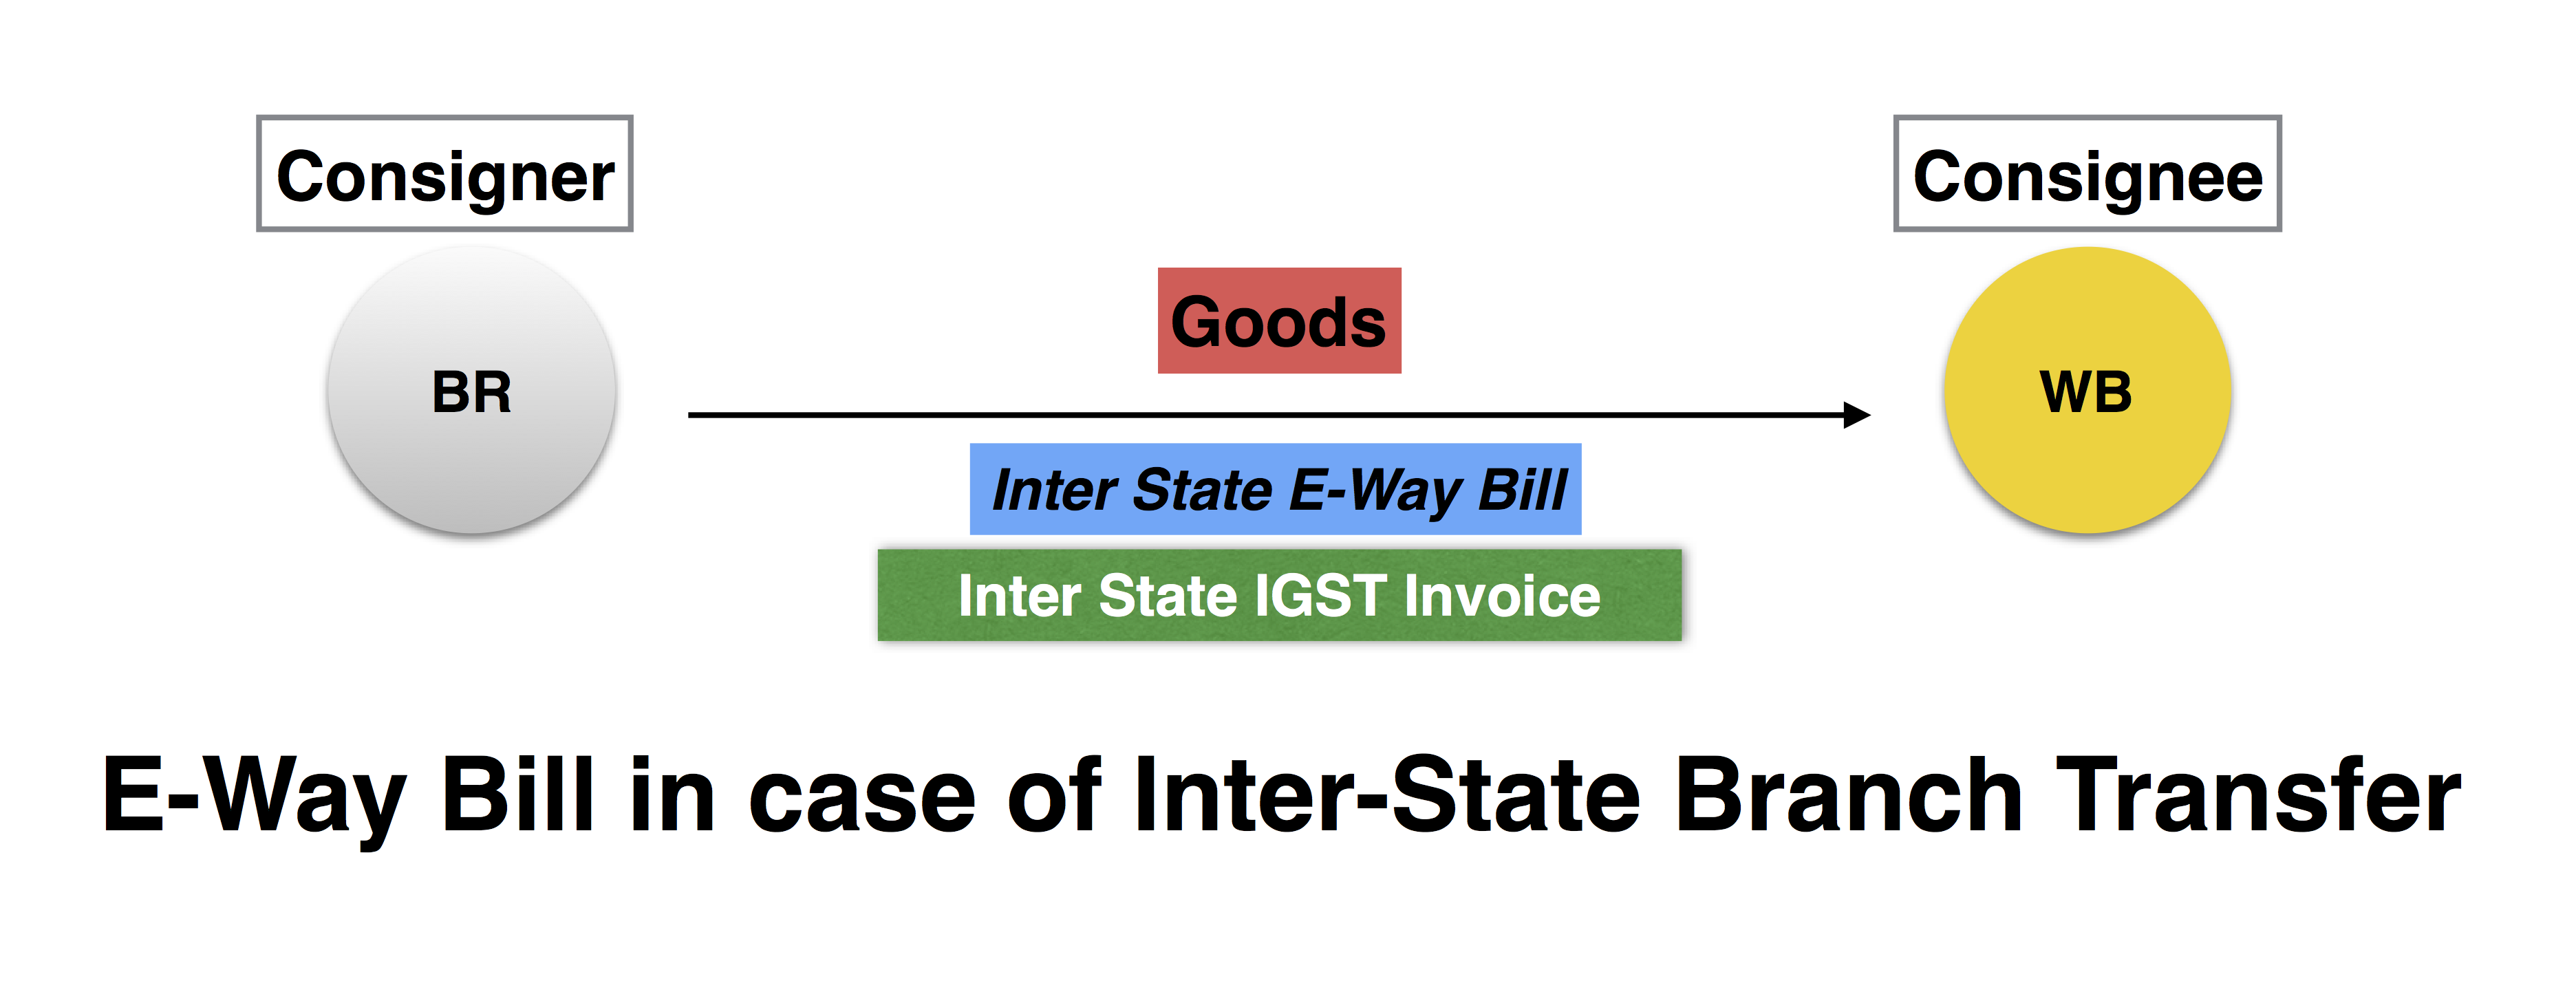 E-Way Bill in case of Inter-State Branch Transfer